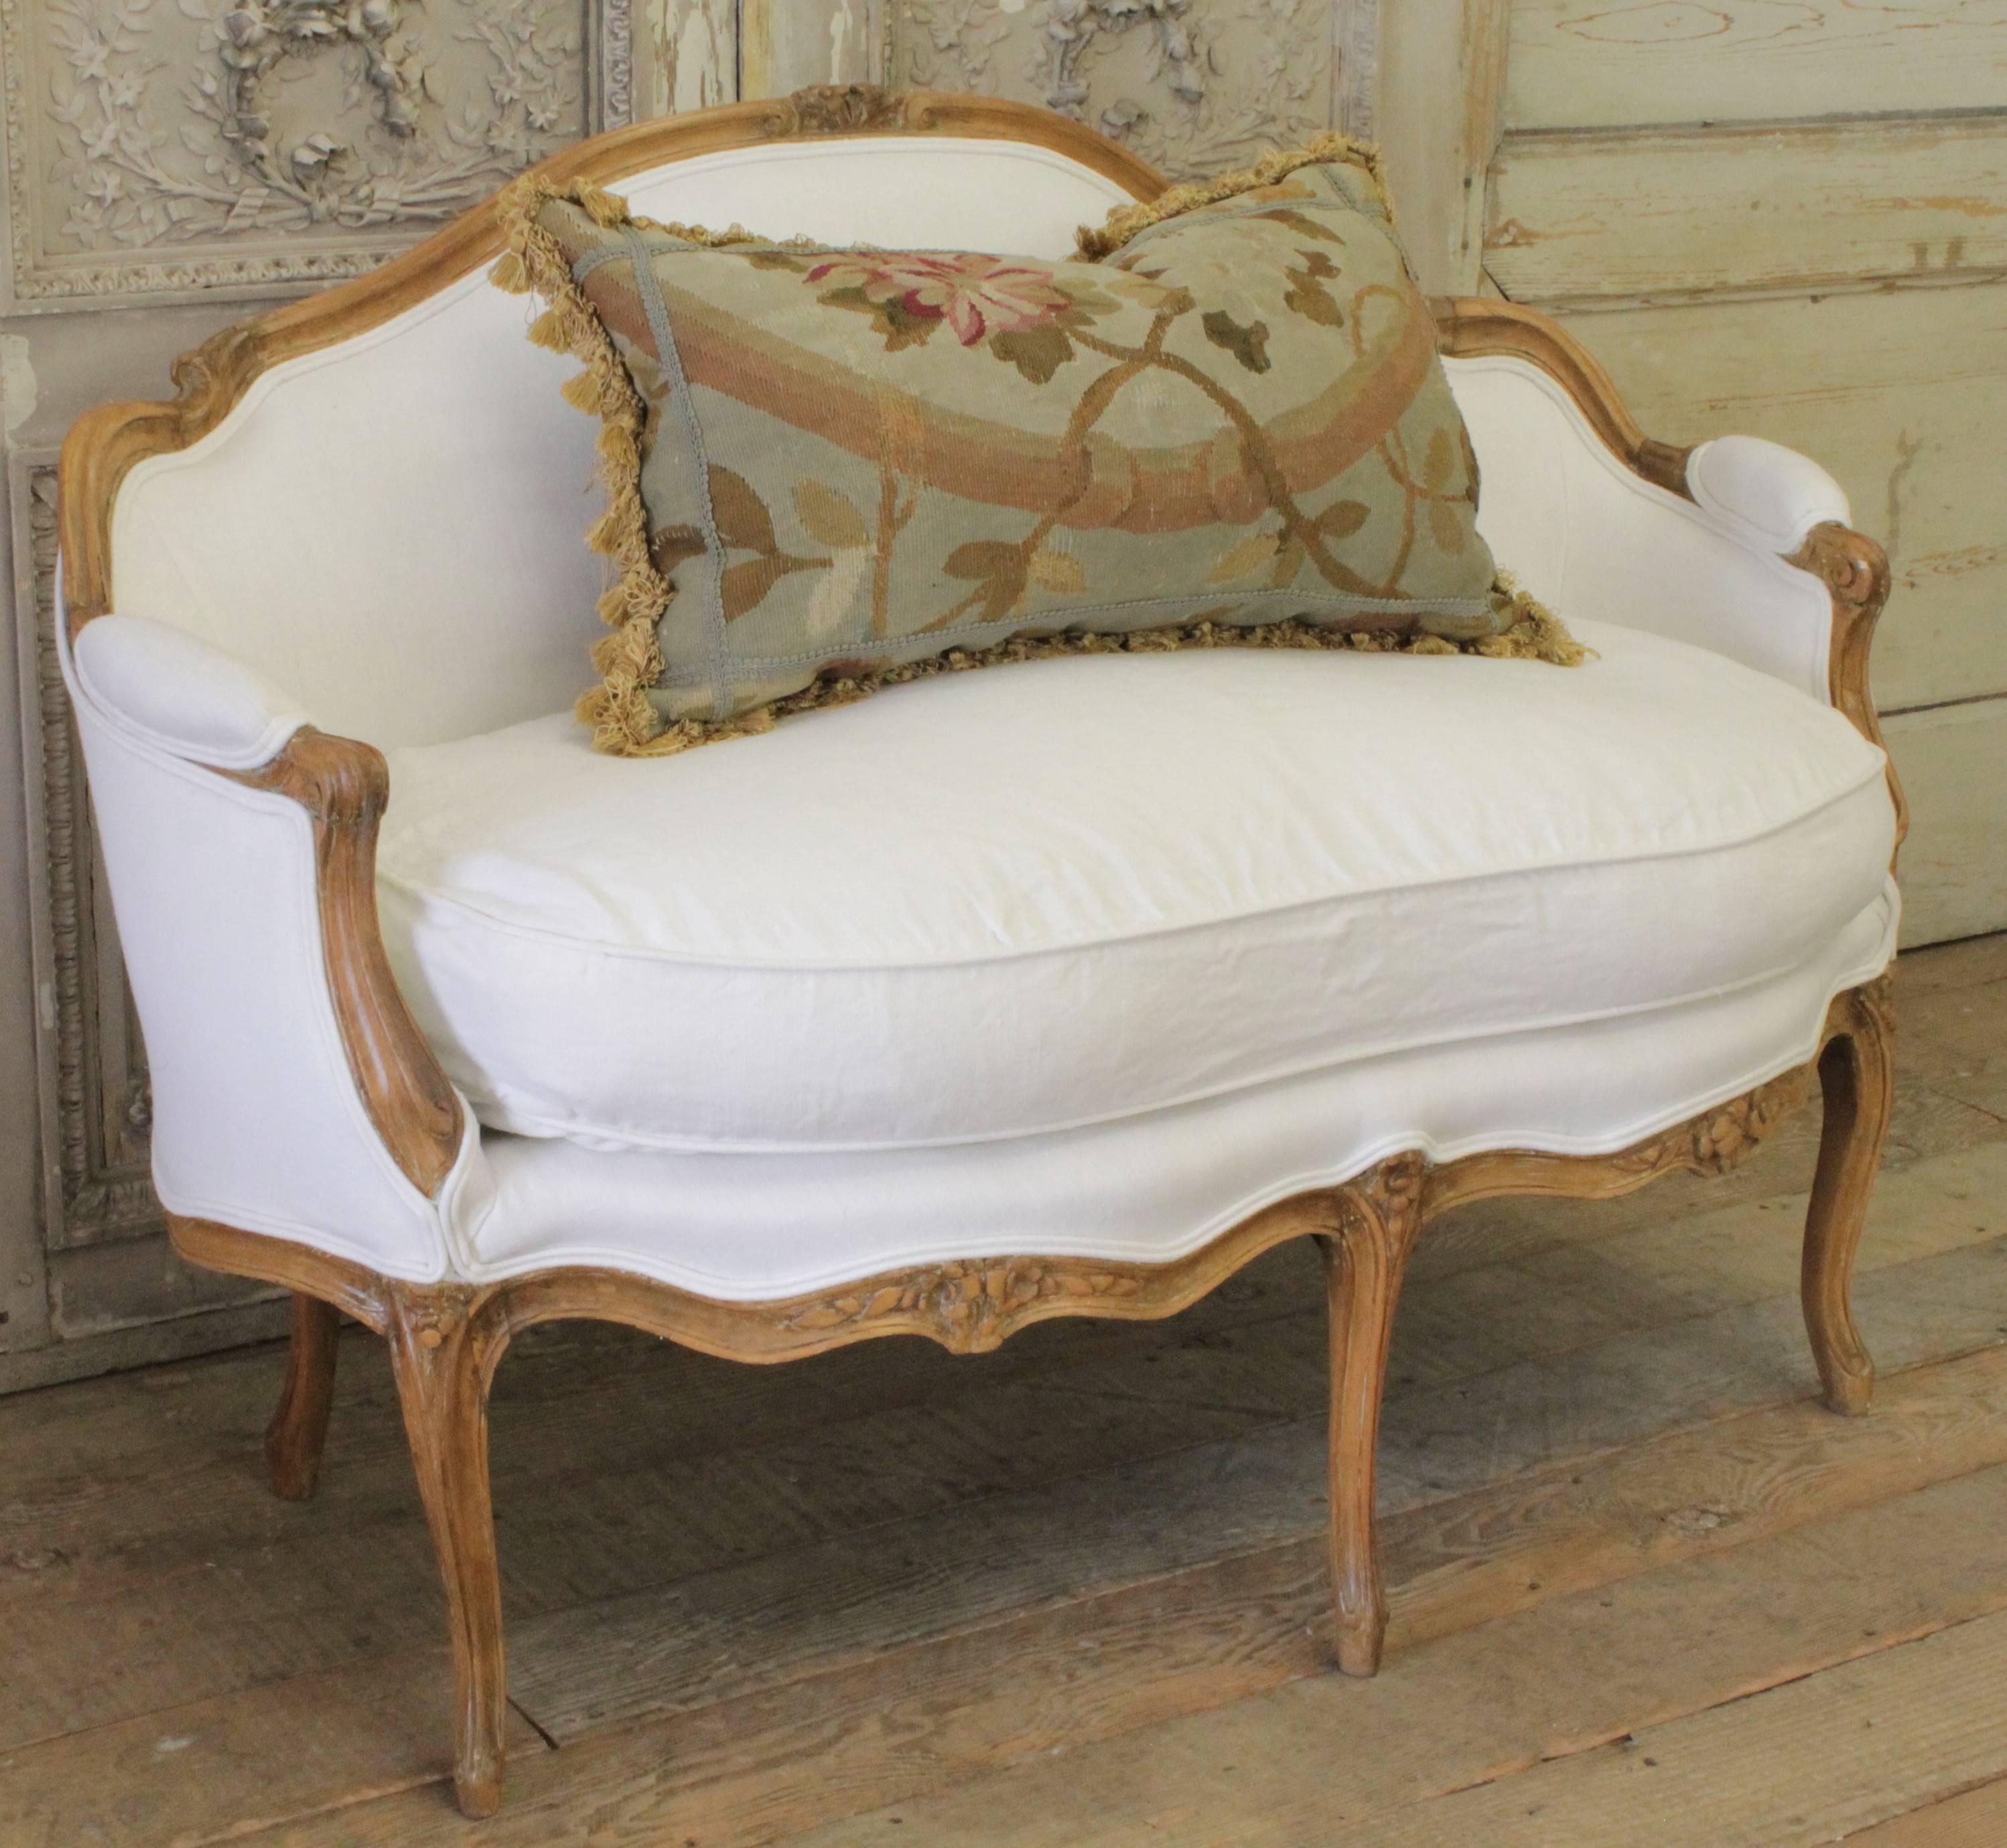 French Louis XV style hand-carved settee with new linen upholstery, circa 1860. Linen is 100% pure Irish linen, seat is slip covered and can be removed. Original caramel colored beech wood has a waxed finish.